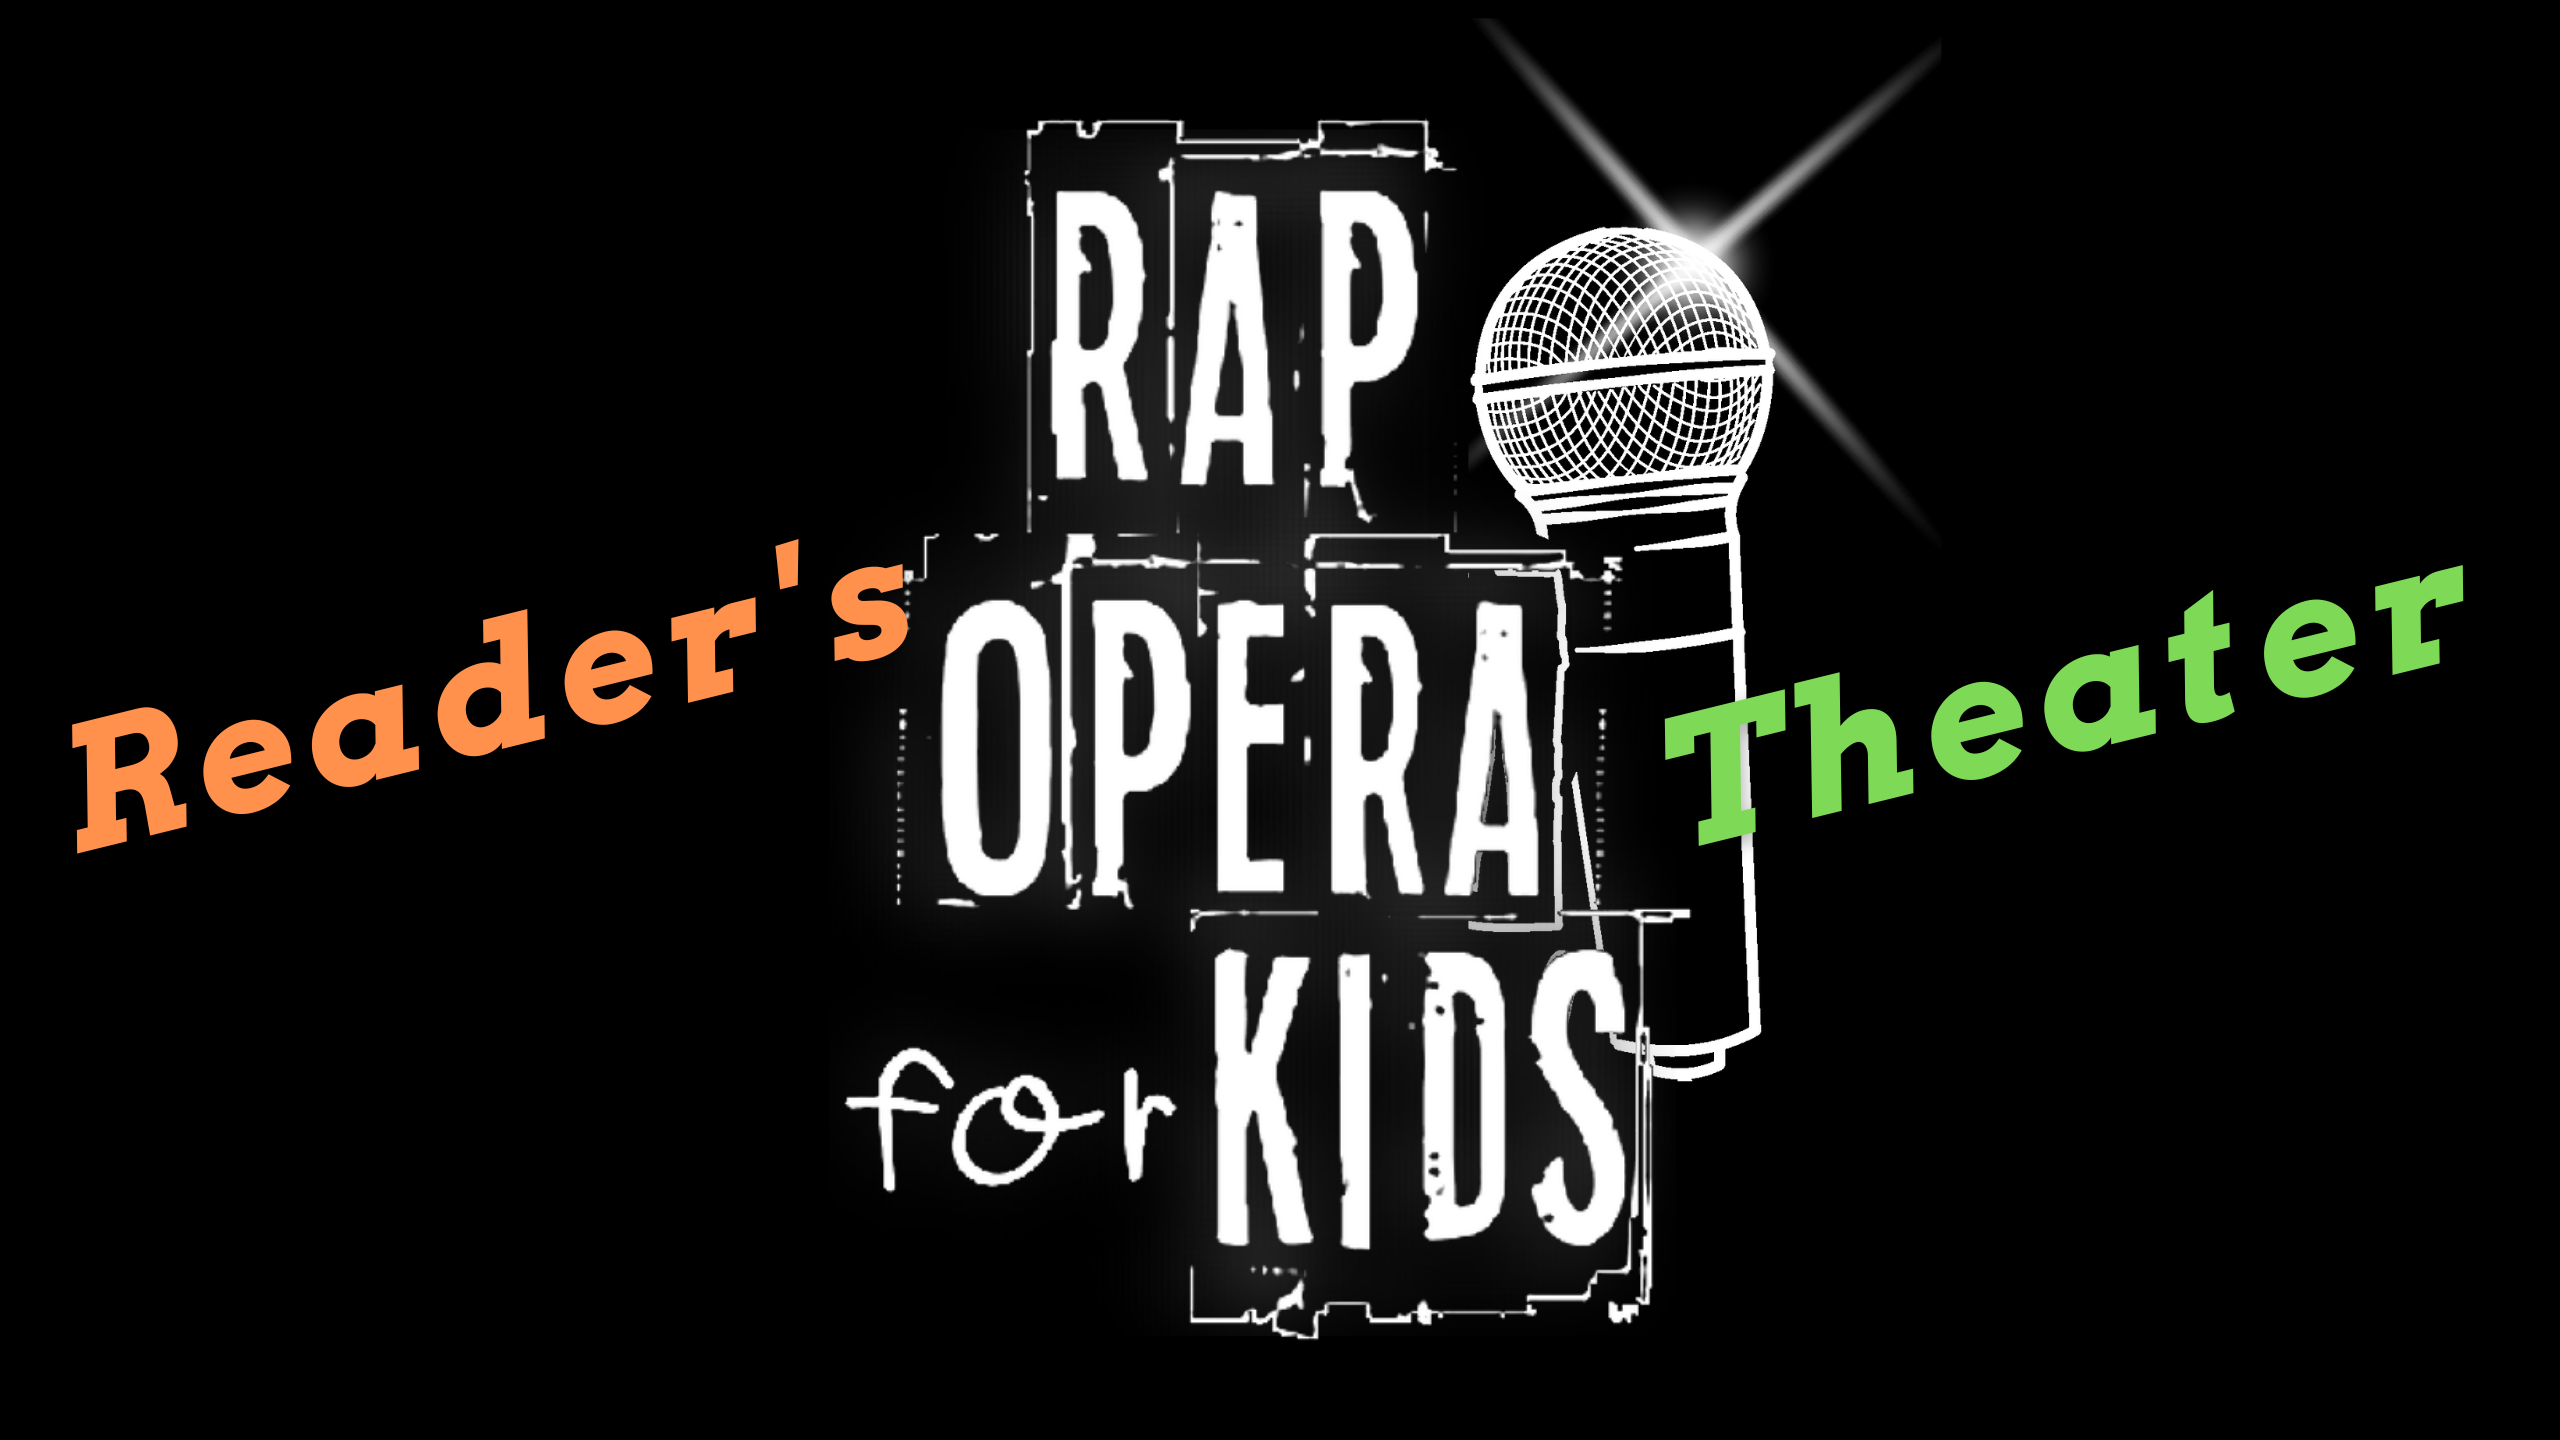 Free Black History Reader s Theater Scripts Rap Opera For Kids - Free Printable Black History Skits For Church